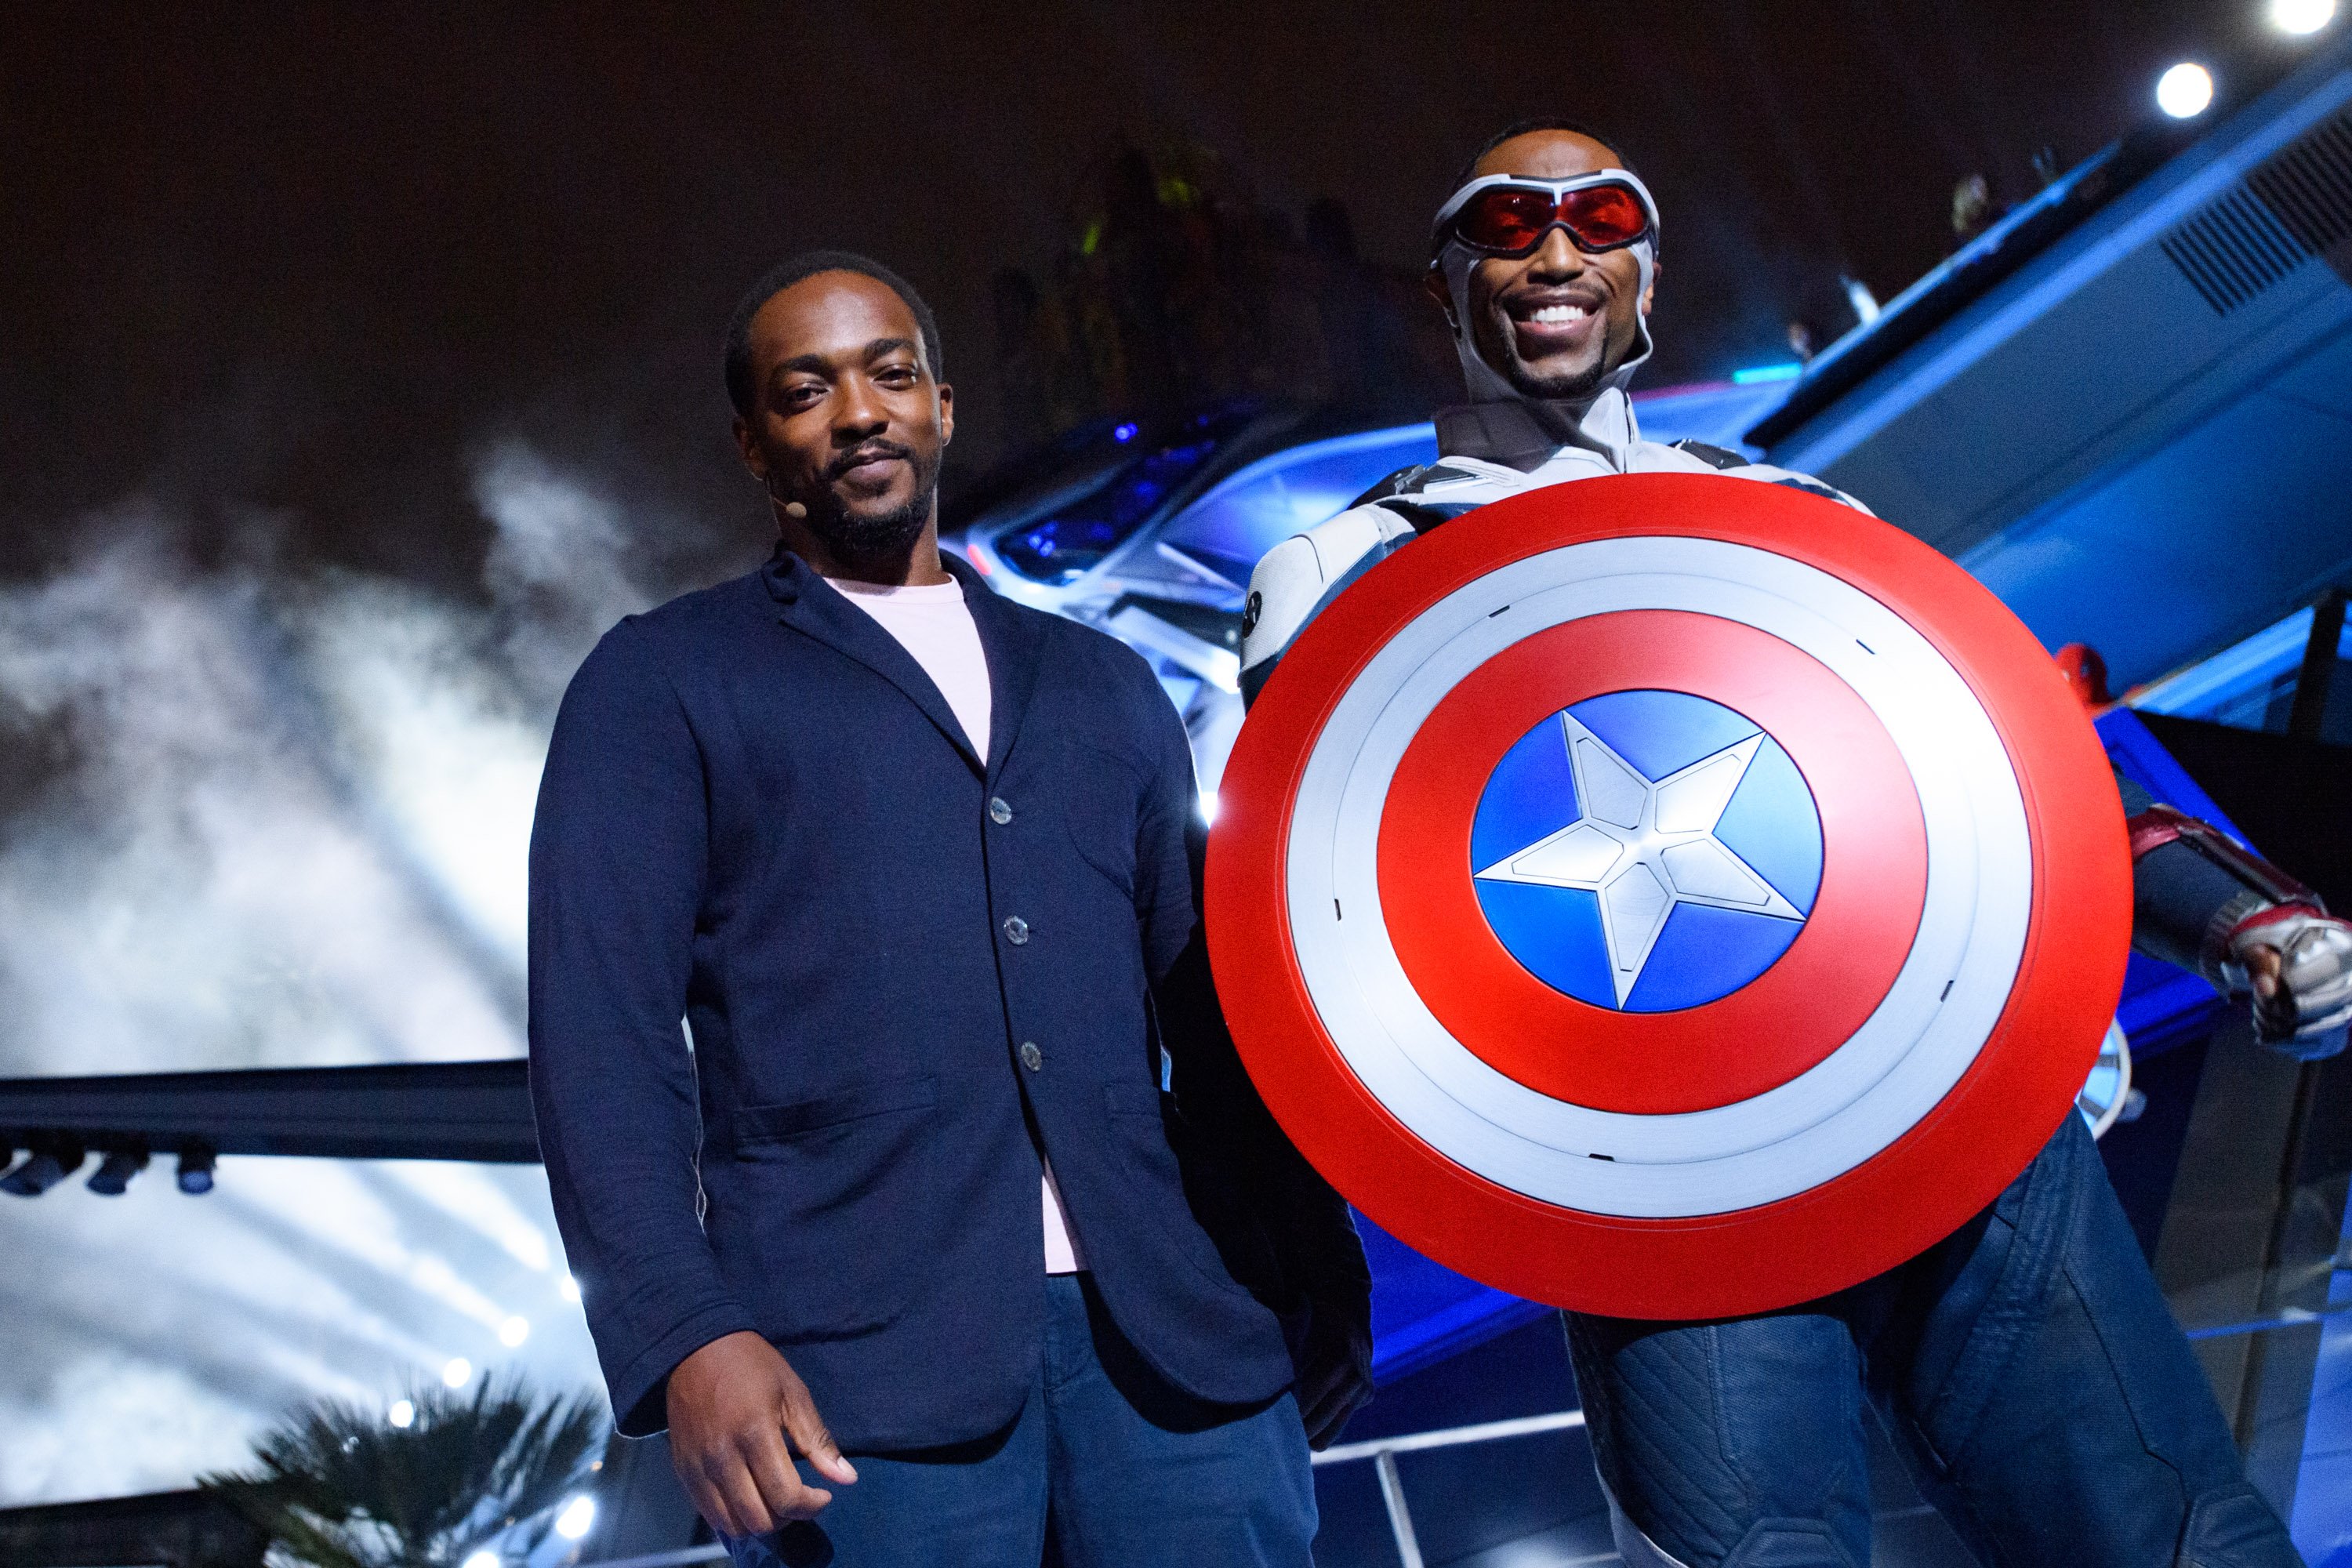 Anthony Mackie 'The Falcon and the Winter Soldier' standing next to actor dressed as Sam Wilson